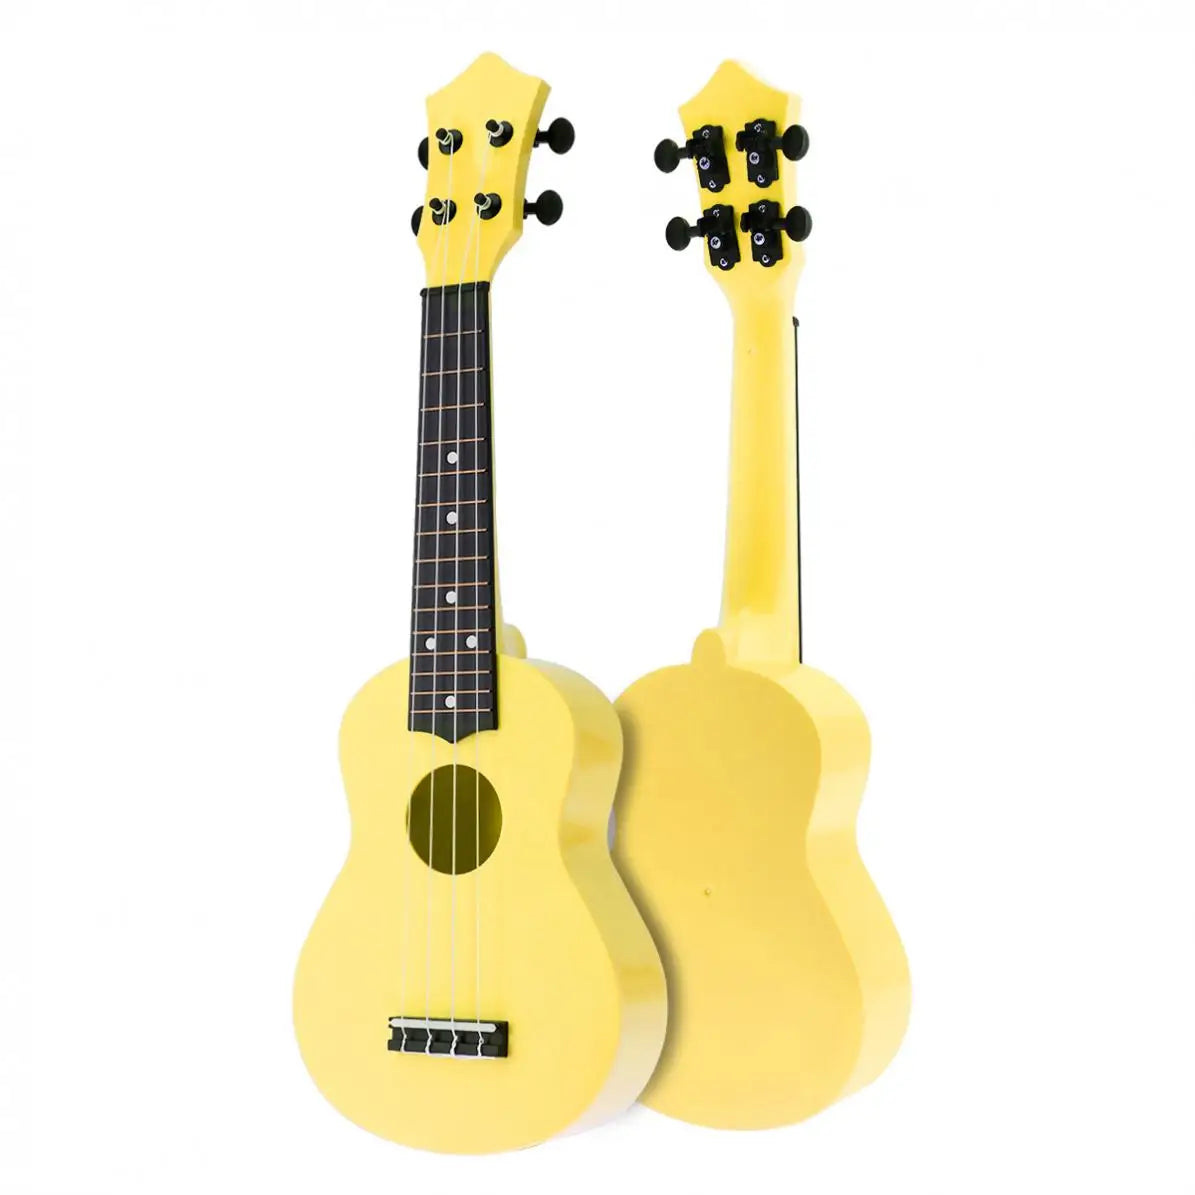 21 Inch Professional Colorful Acoustic Ukulele with 4 Strings